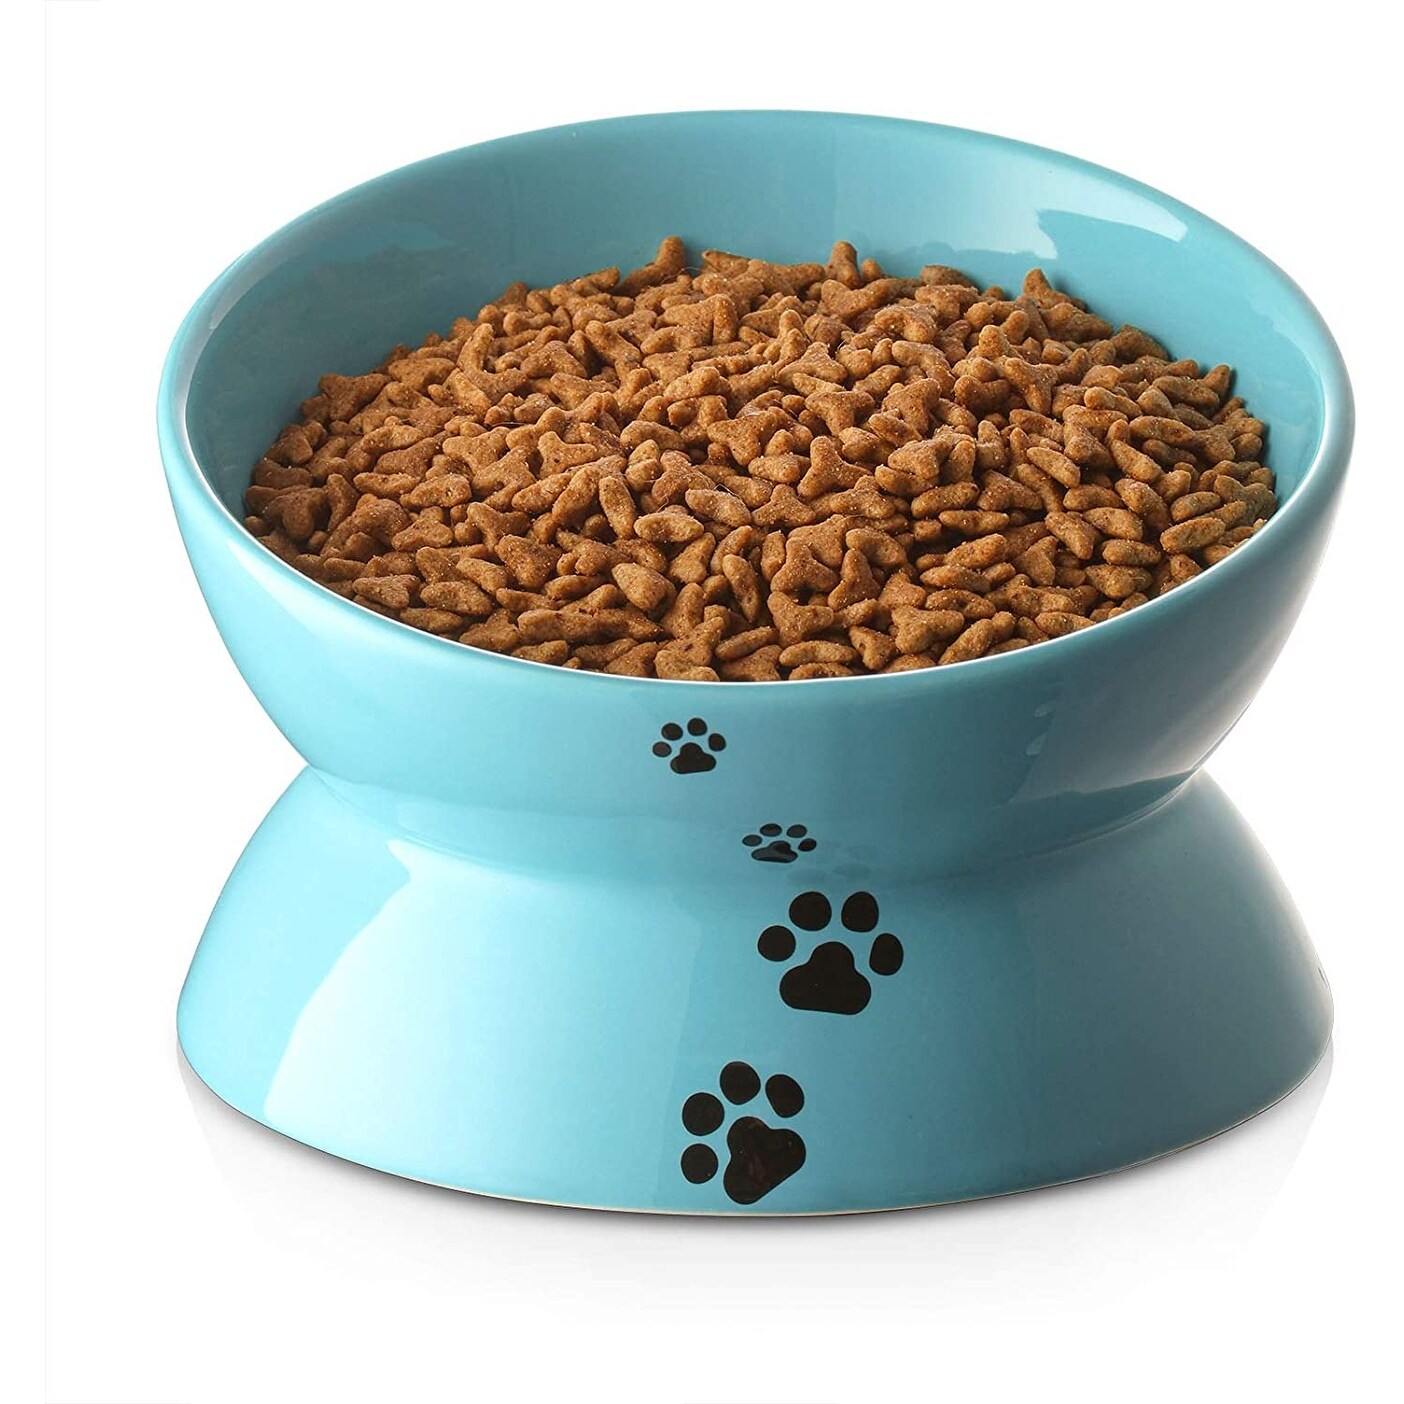 https://ak1.ostkcdn.com/images/products/is/images/direct/fb90e81abd960e6b4485ff19bdf77bb53f13f98d/Y-YHY-Cat-Bowl%2CLarge-Raised-Cat-Food-Bowls-Anti-Vomiting%2CCeramic-Pet-Food-Bowl-for-Adult-Cats-and-Medium-Dogs.jpg